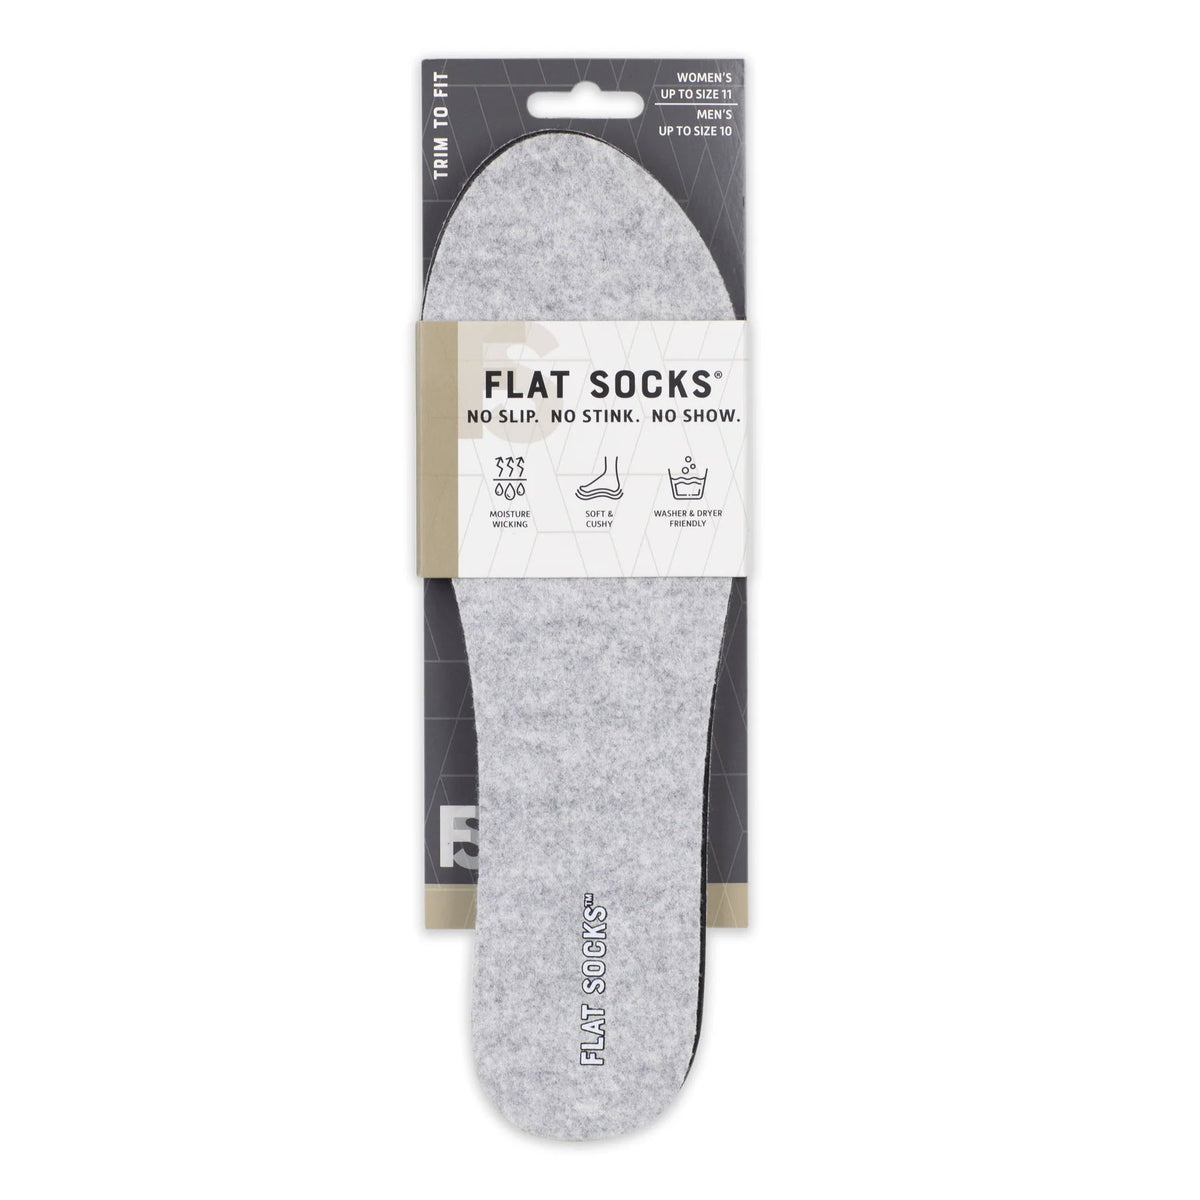 A pair of FLAT SOCKS light gray trim-to-fit socks in packaging, labeled &quot;no slip, no stink, no show,&quot; designed for women&#39;s shoe sizes 5.5-9.